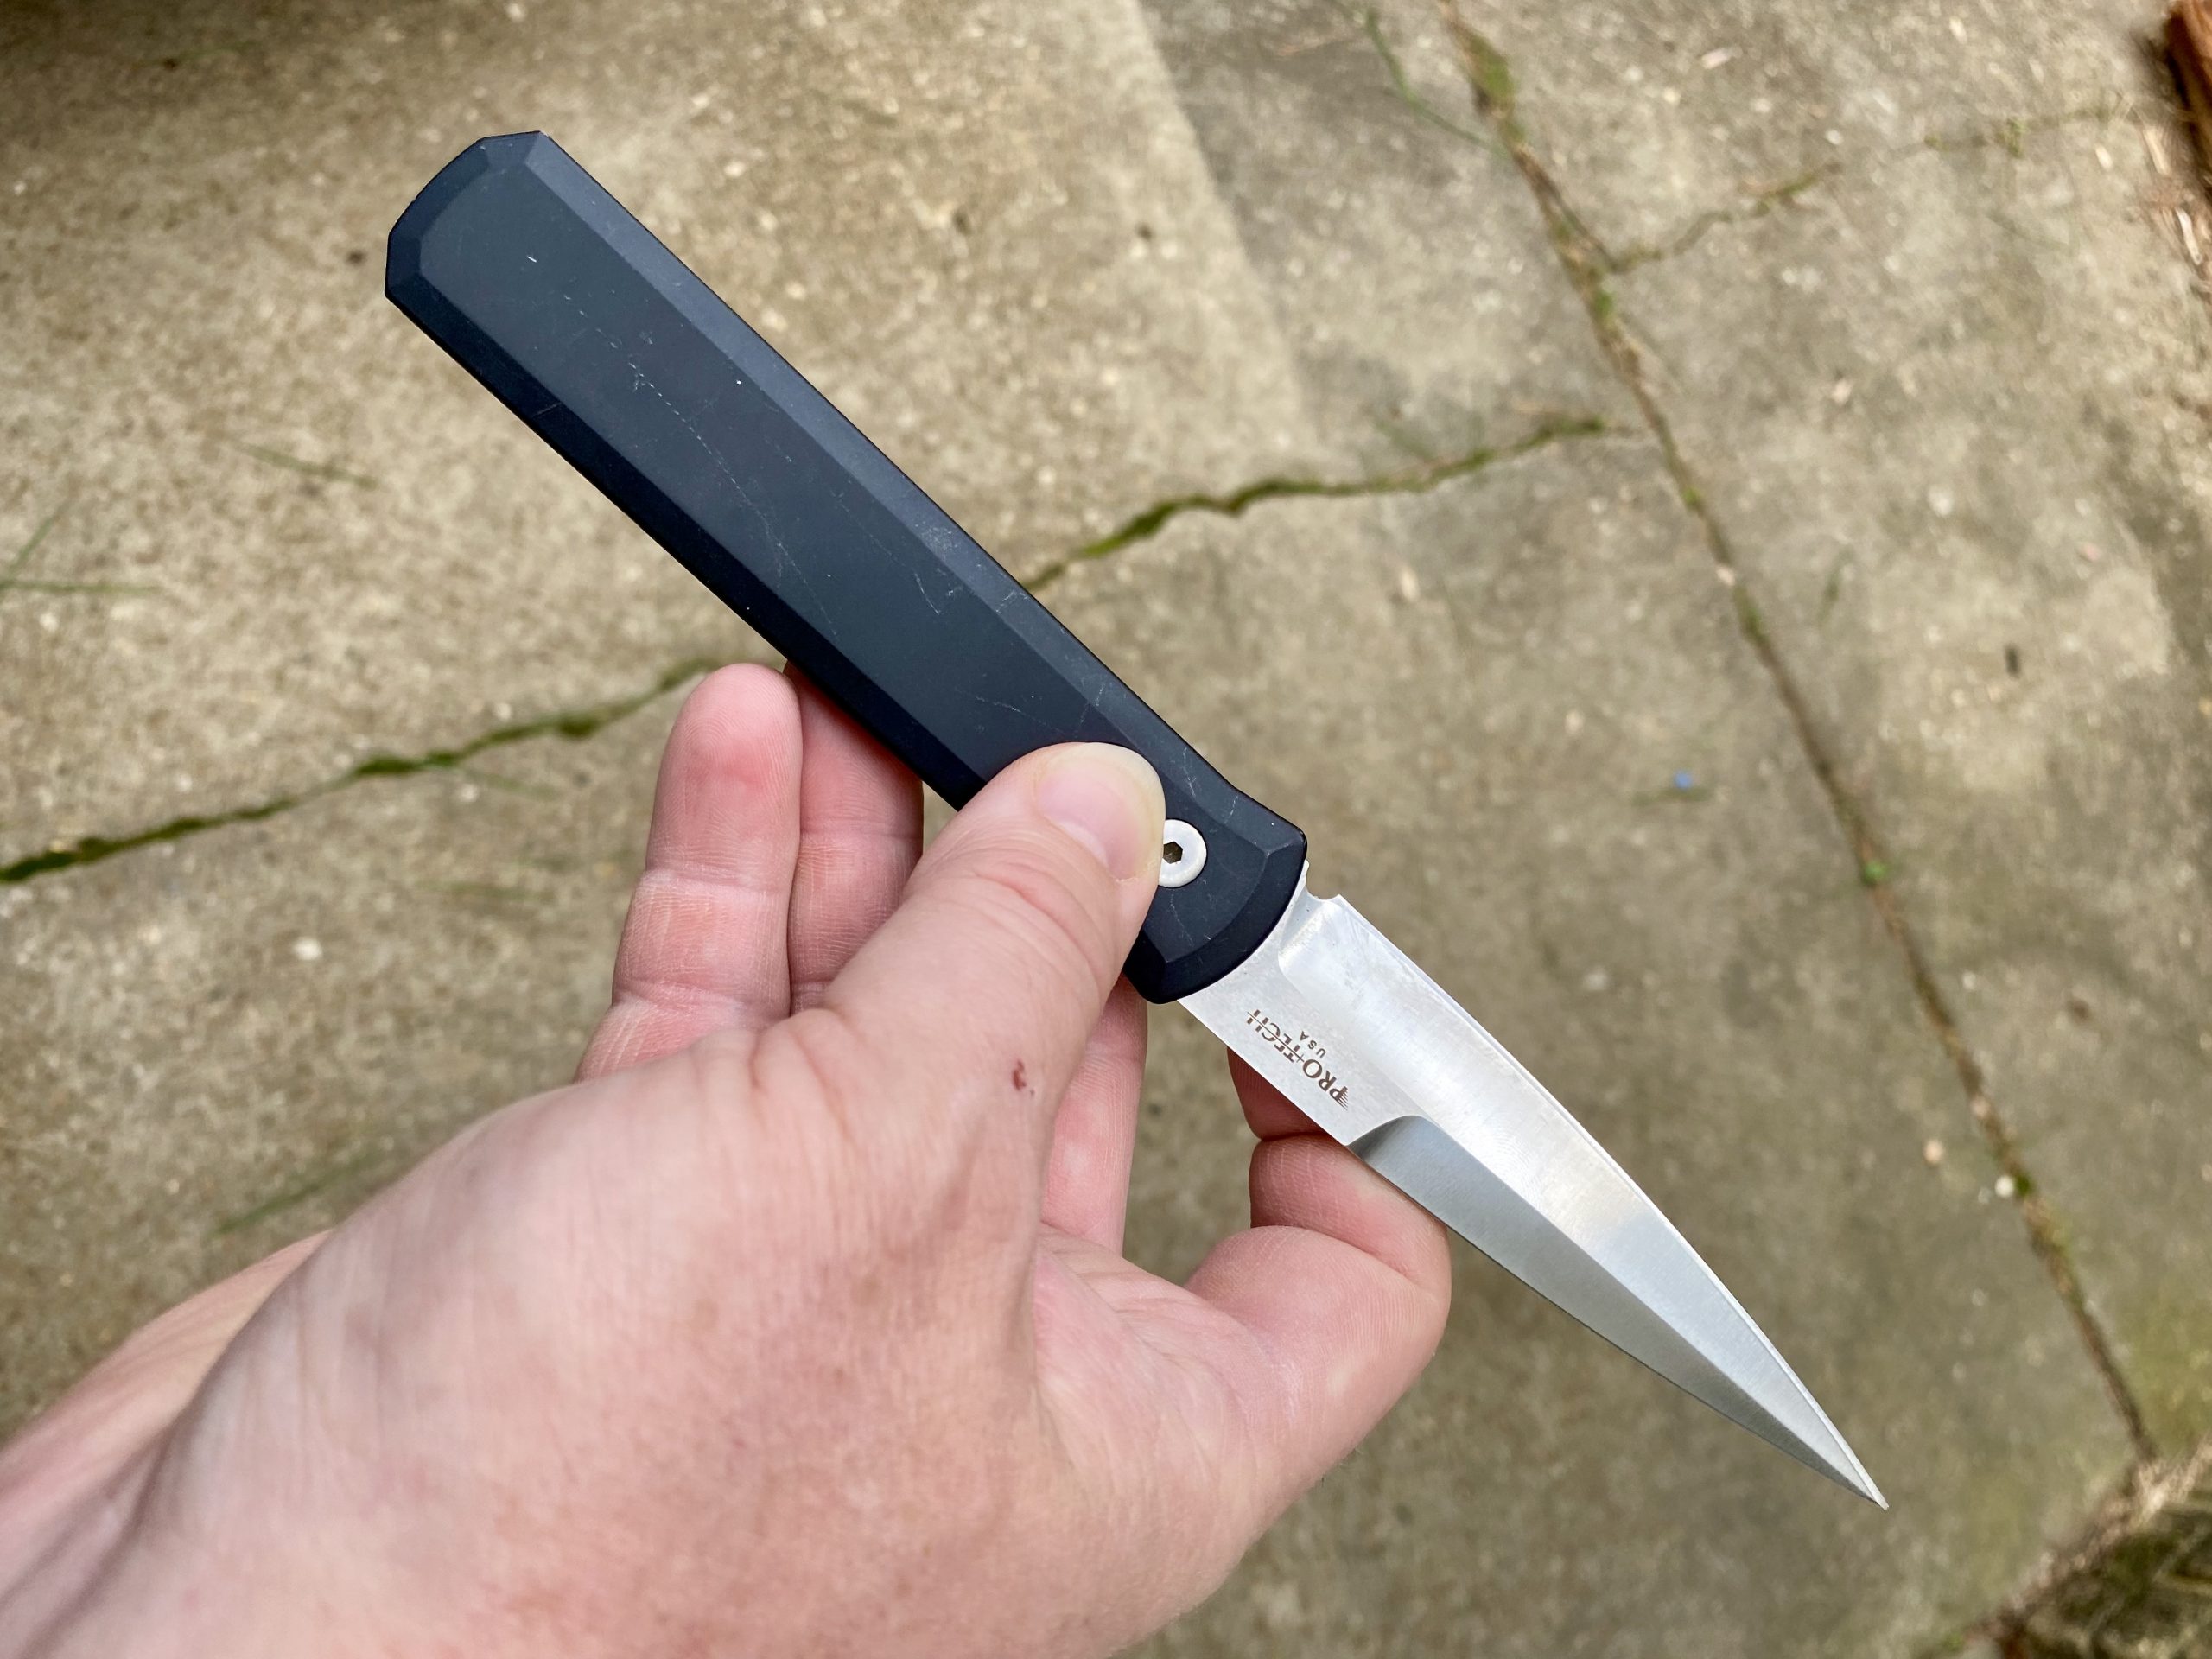 Open, the Godfather is 9 inches. The size feels perfect. If you want something smaller, they make a knife called the Godson that is shorter.